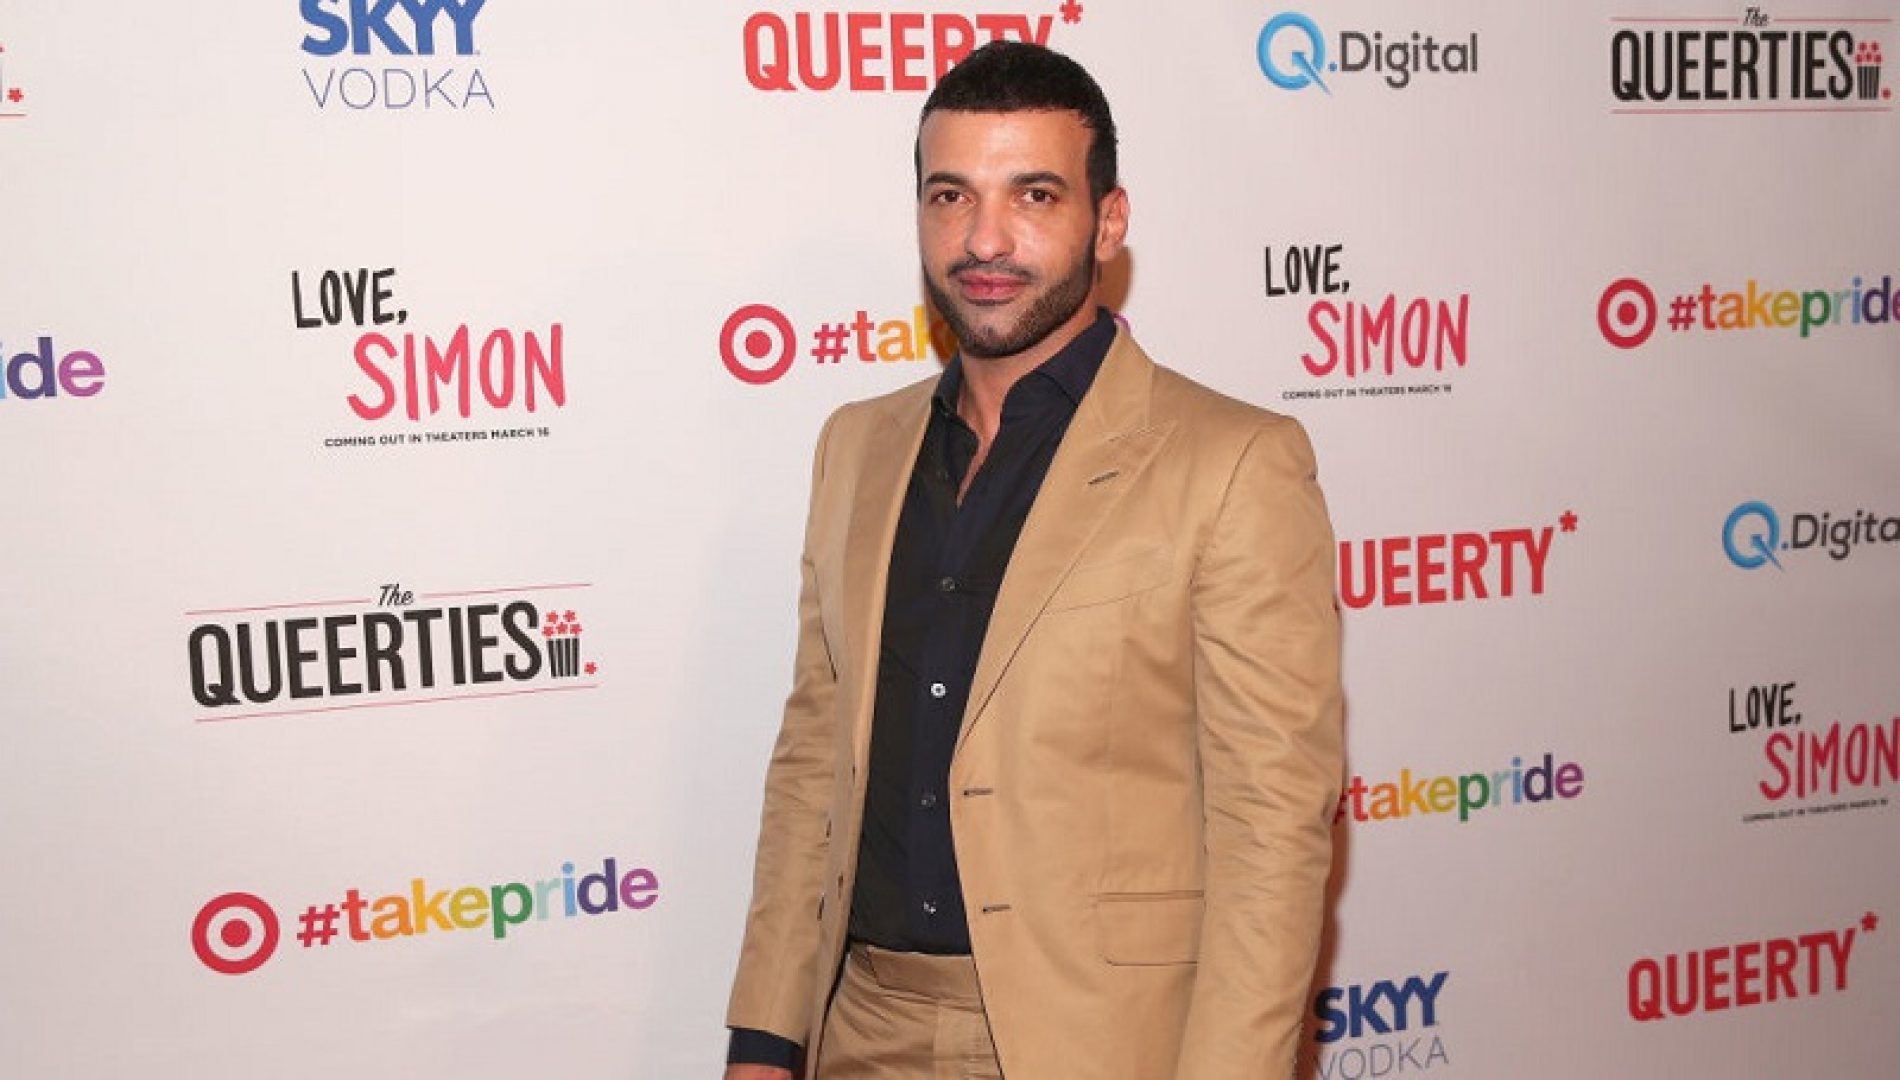 “I’m Ready To Break Out And Challenge The World We Live In.” Haaz Sleiman speaks on his new show and how coming out as a “total bottom” impacted his career